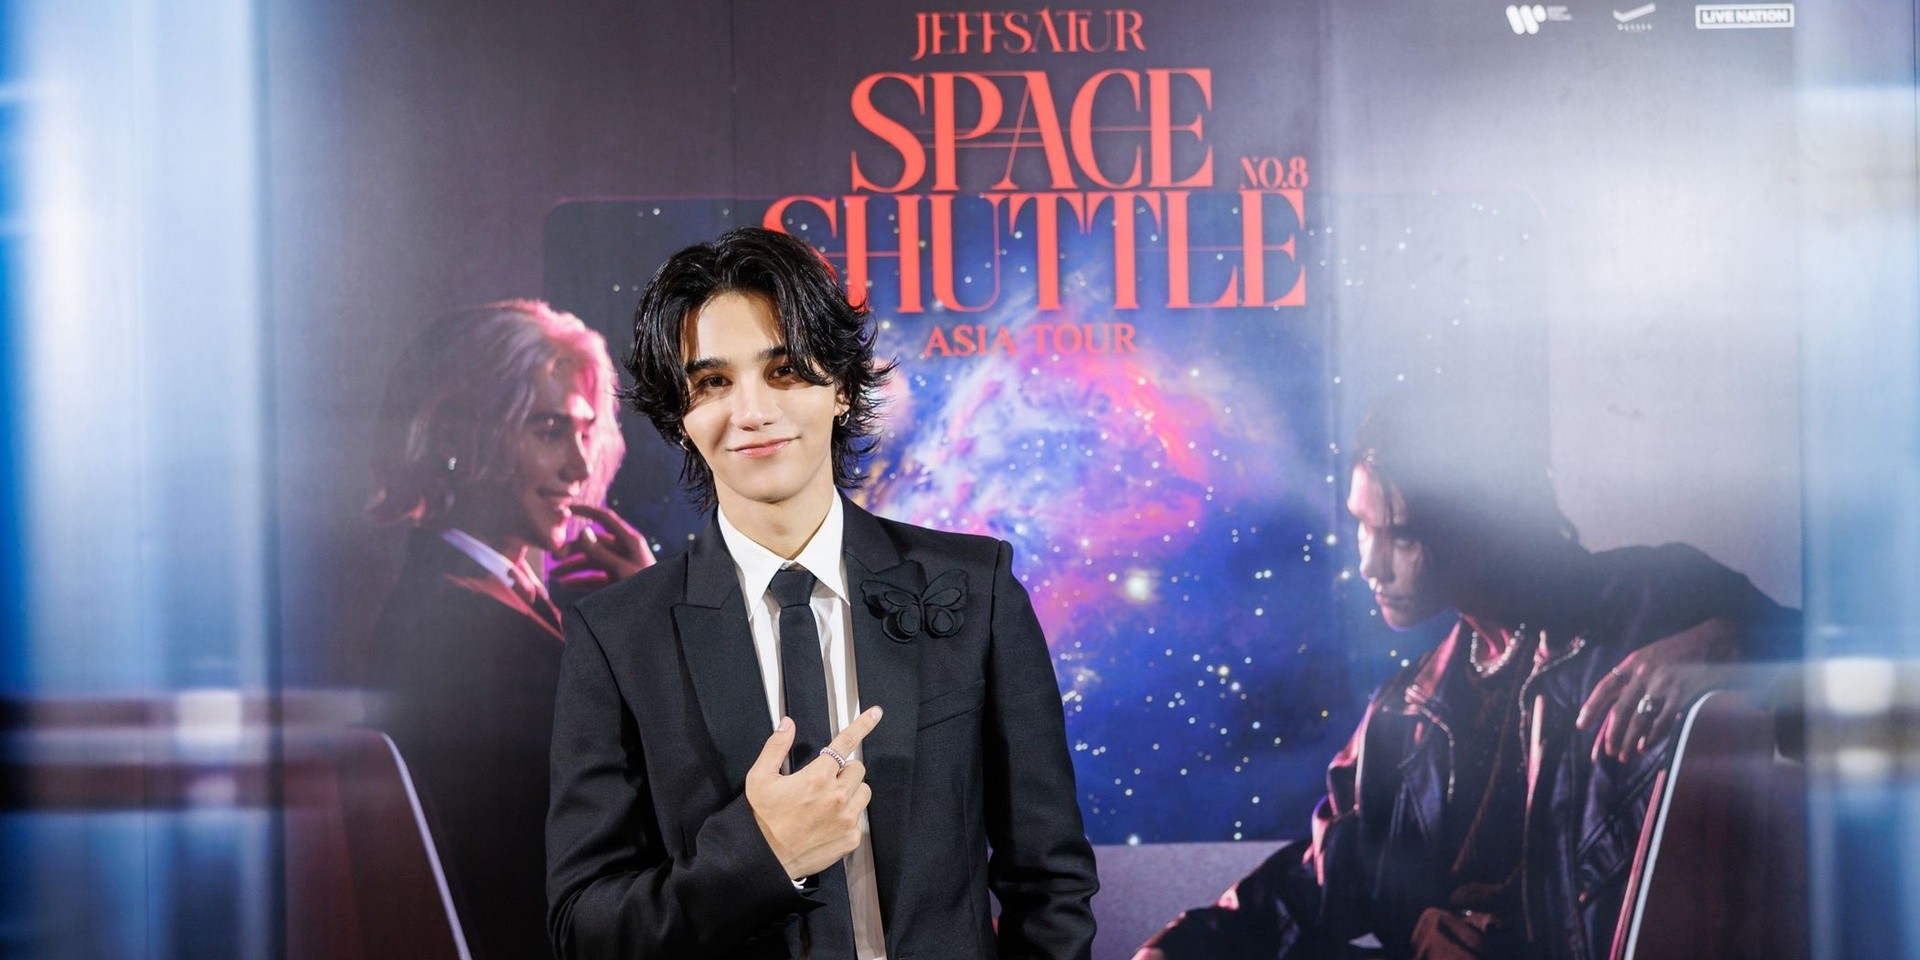 Jeff Satur to embark on 'Space Shuttle No.8 Asia Tour' in 2024 — Singapore, Manila, Jakarta, Bangkok, and more confirmed